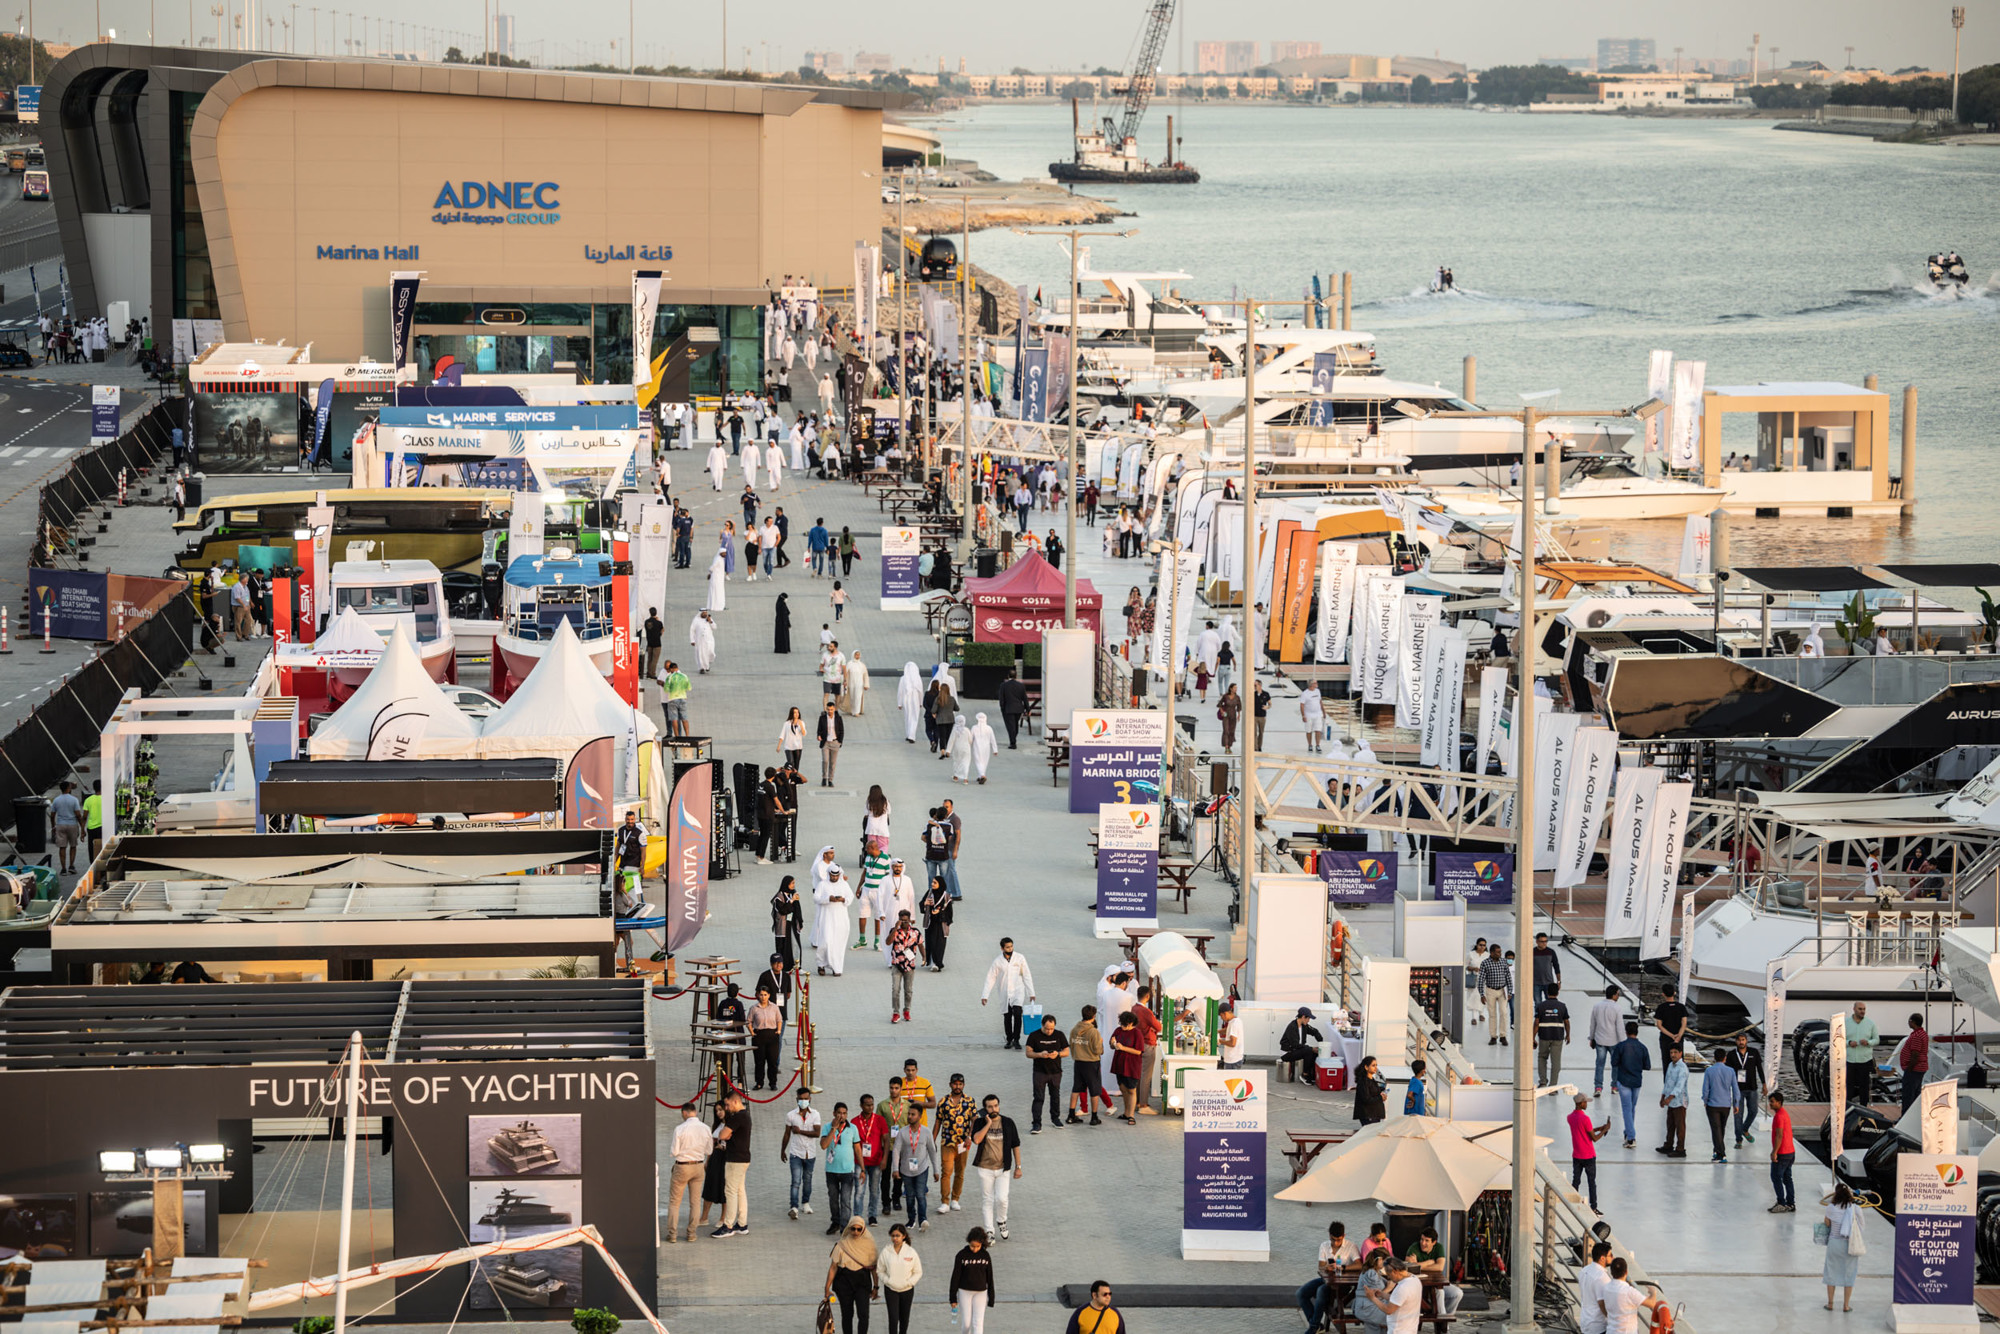 ADNEC Group Is Set To Host The 5th Edition Of Abu Dhabi International Boat Show From 9-12 November